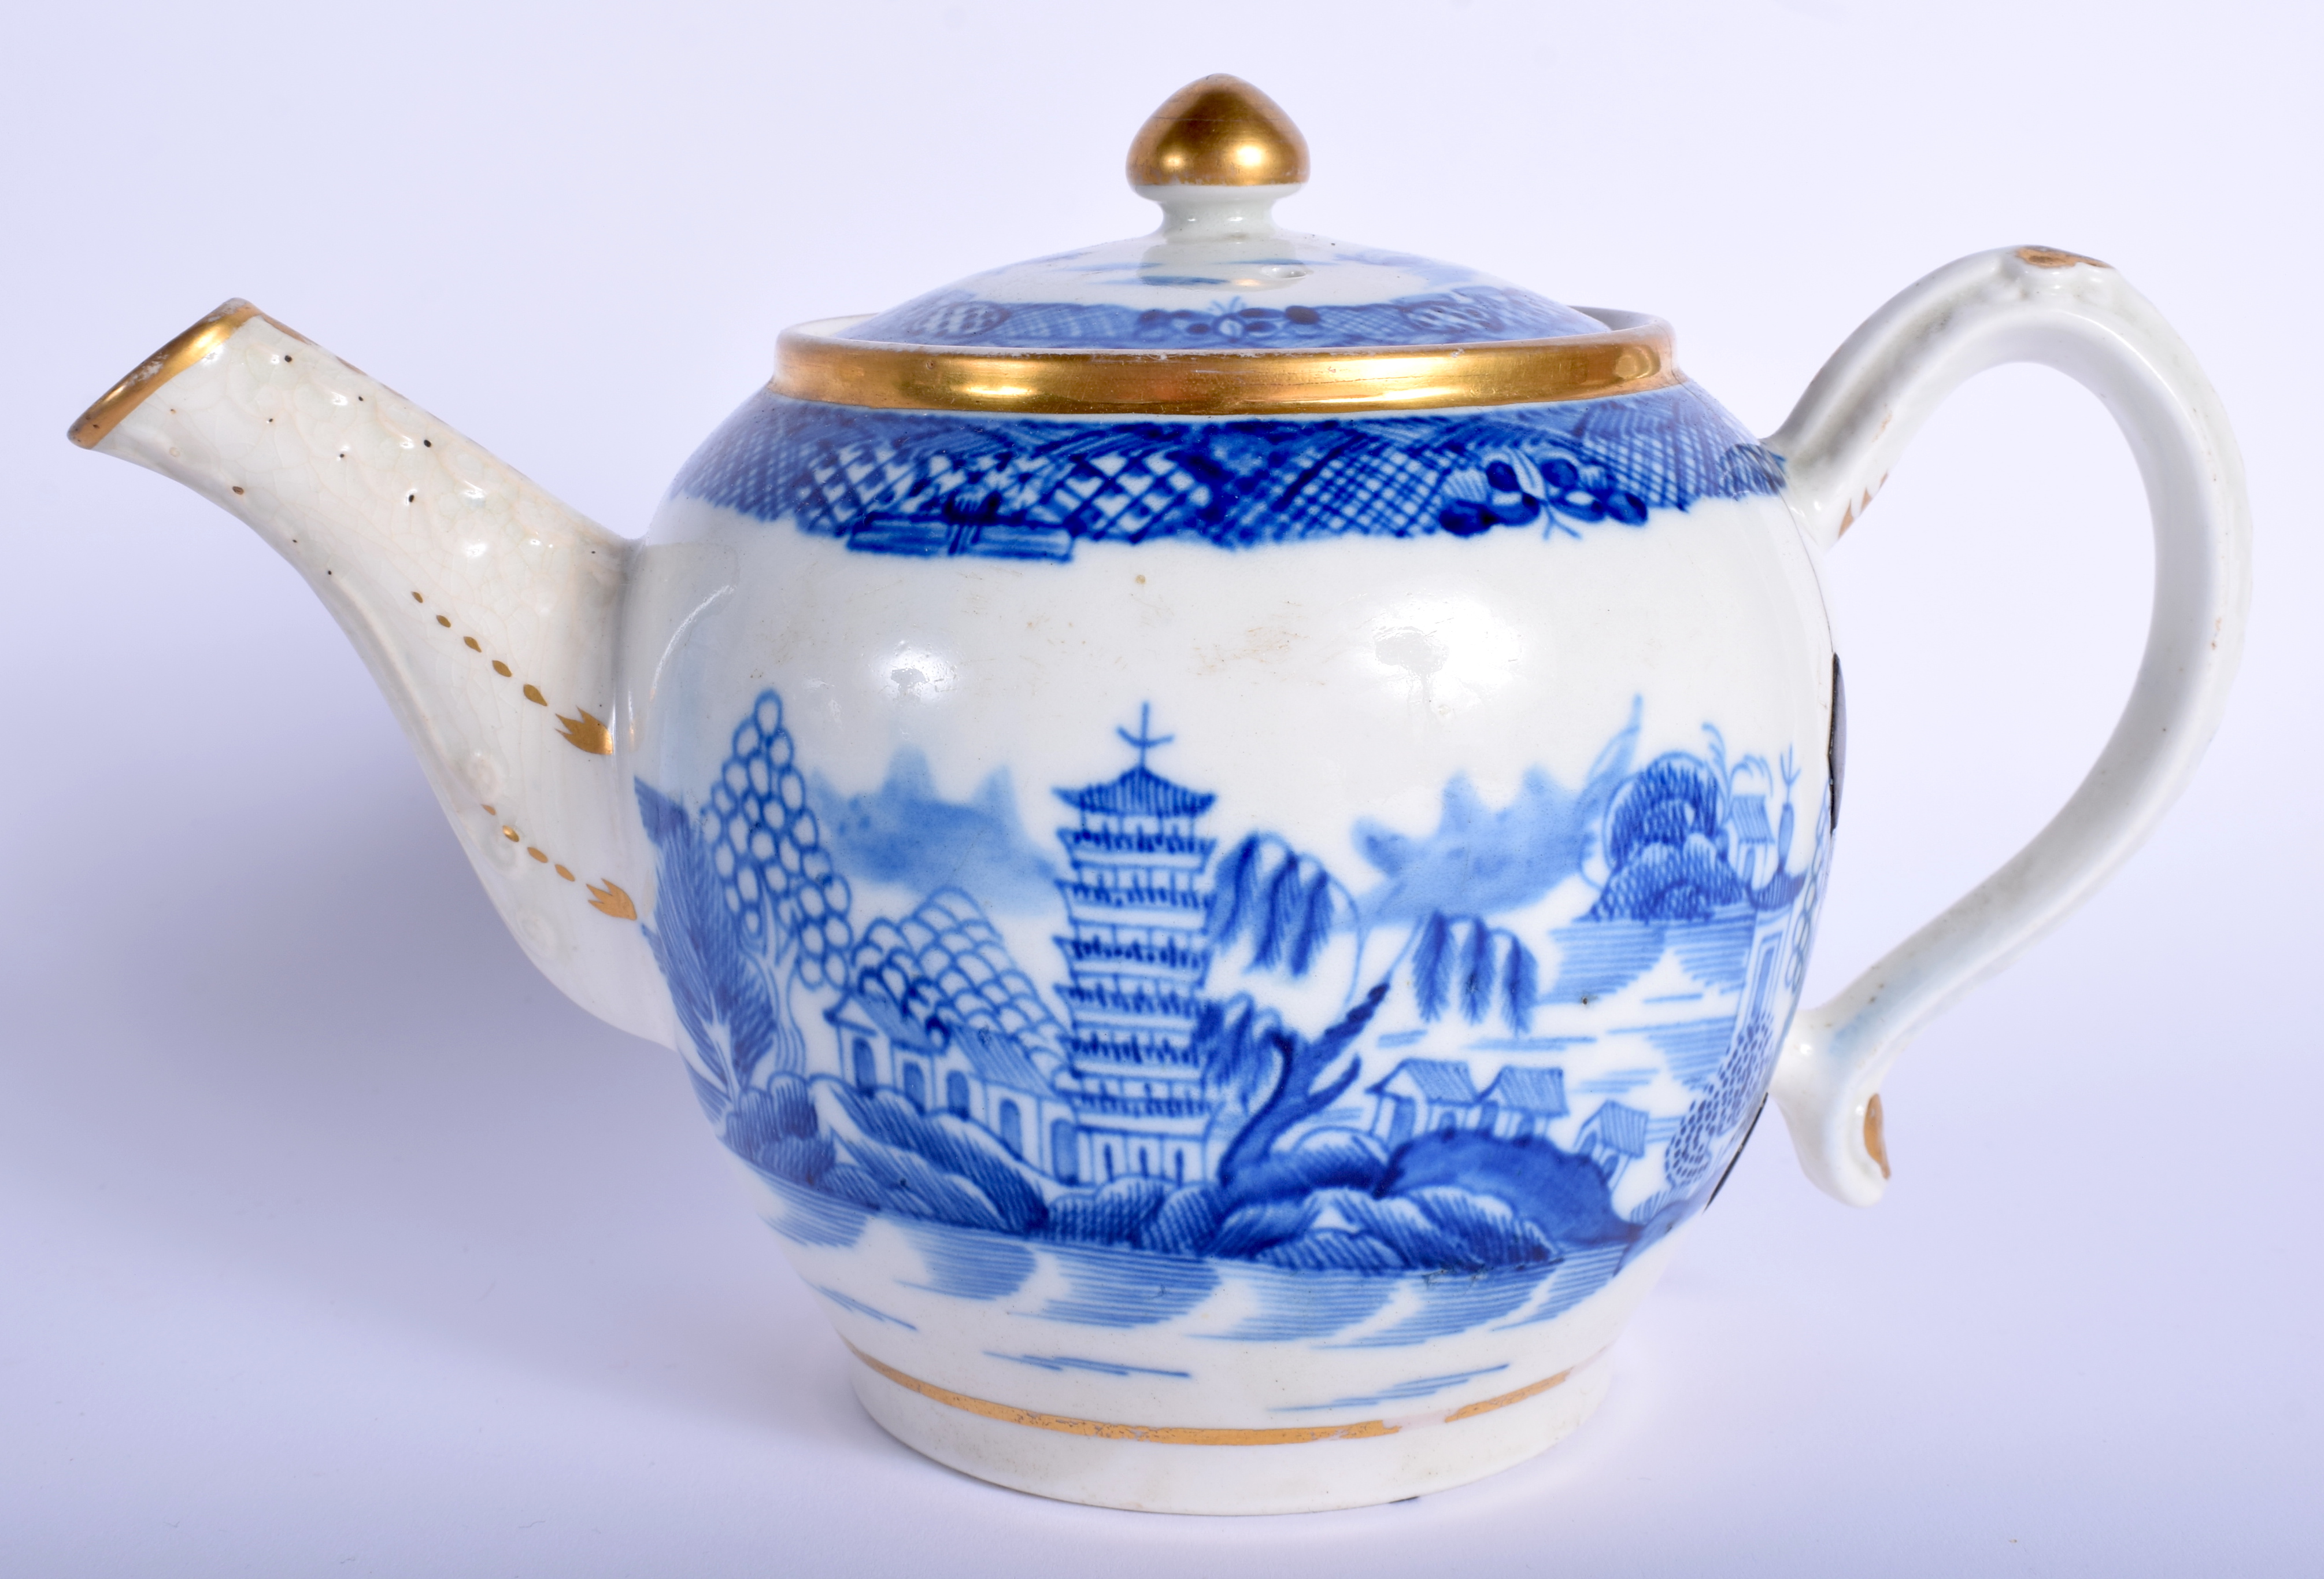 AN EARLY 19TH CENTURY ENGLISH PEARLWARE TEASET painted with landscapes. Largest 24 cm wide. (14) - Bild 2 aus 8